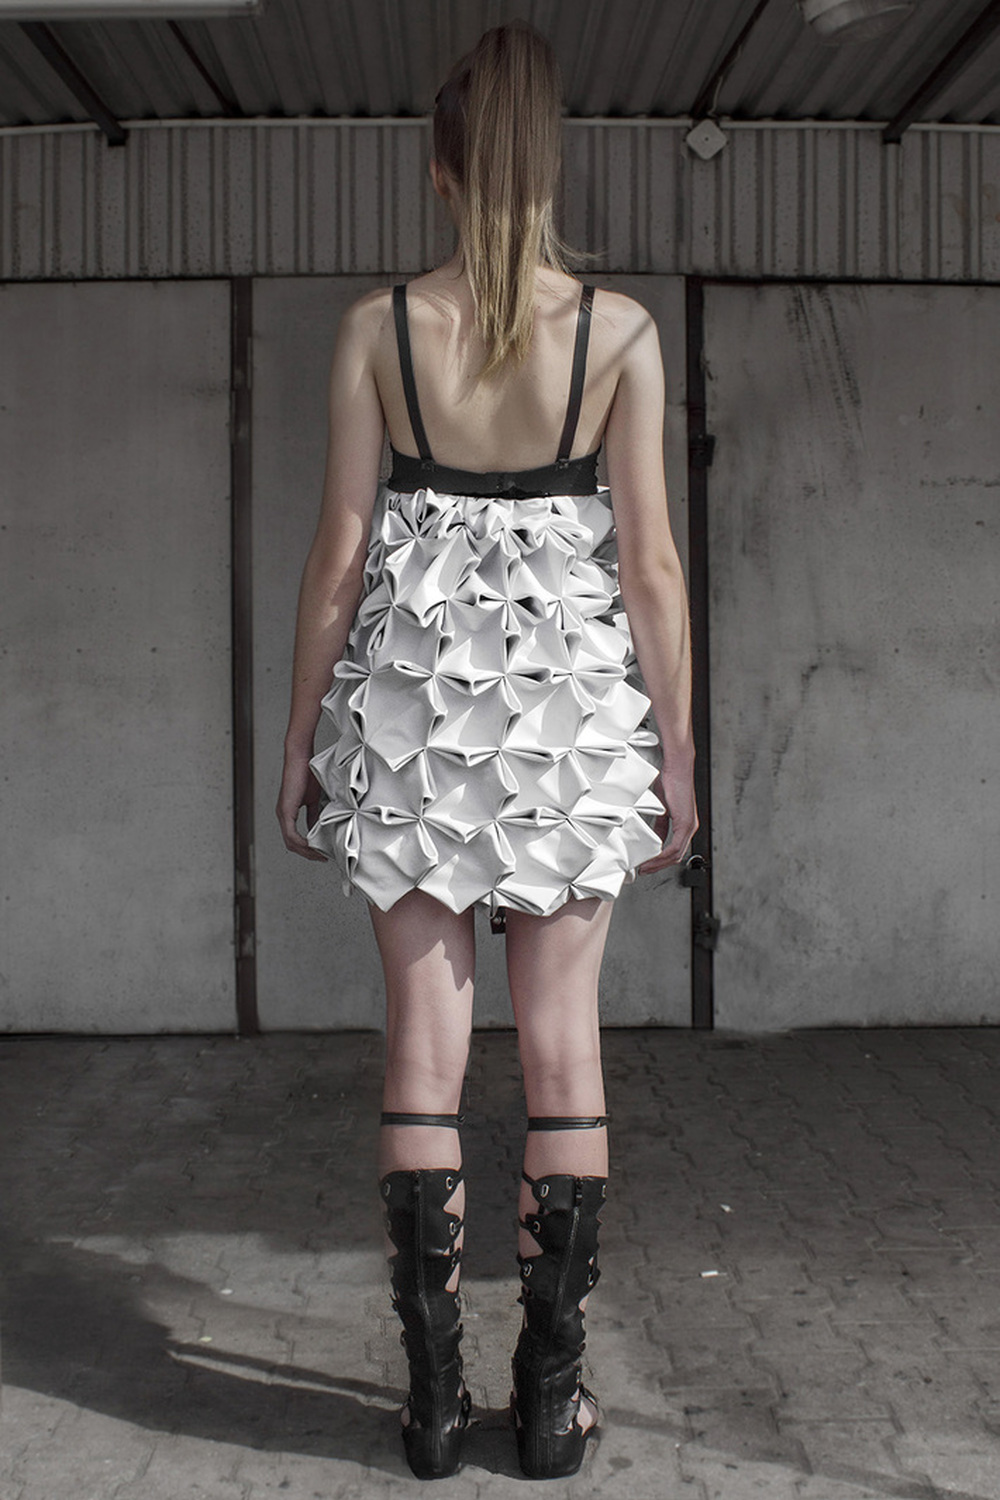 Look 8

Hand-smocked, sculptural, leather dress with raw, metal embellishments 